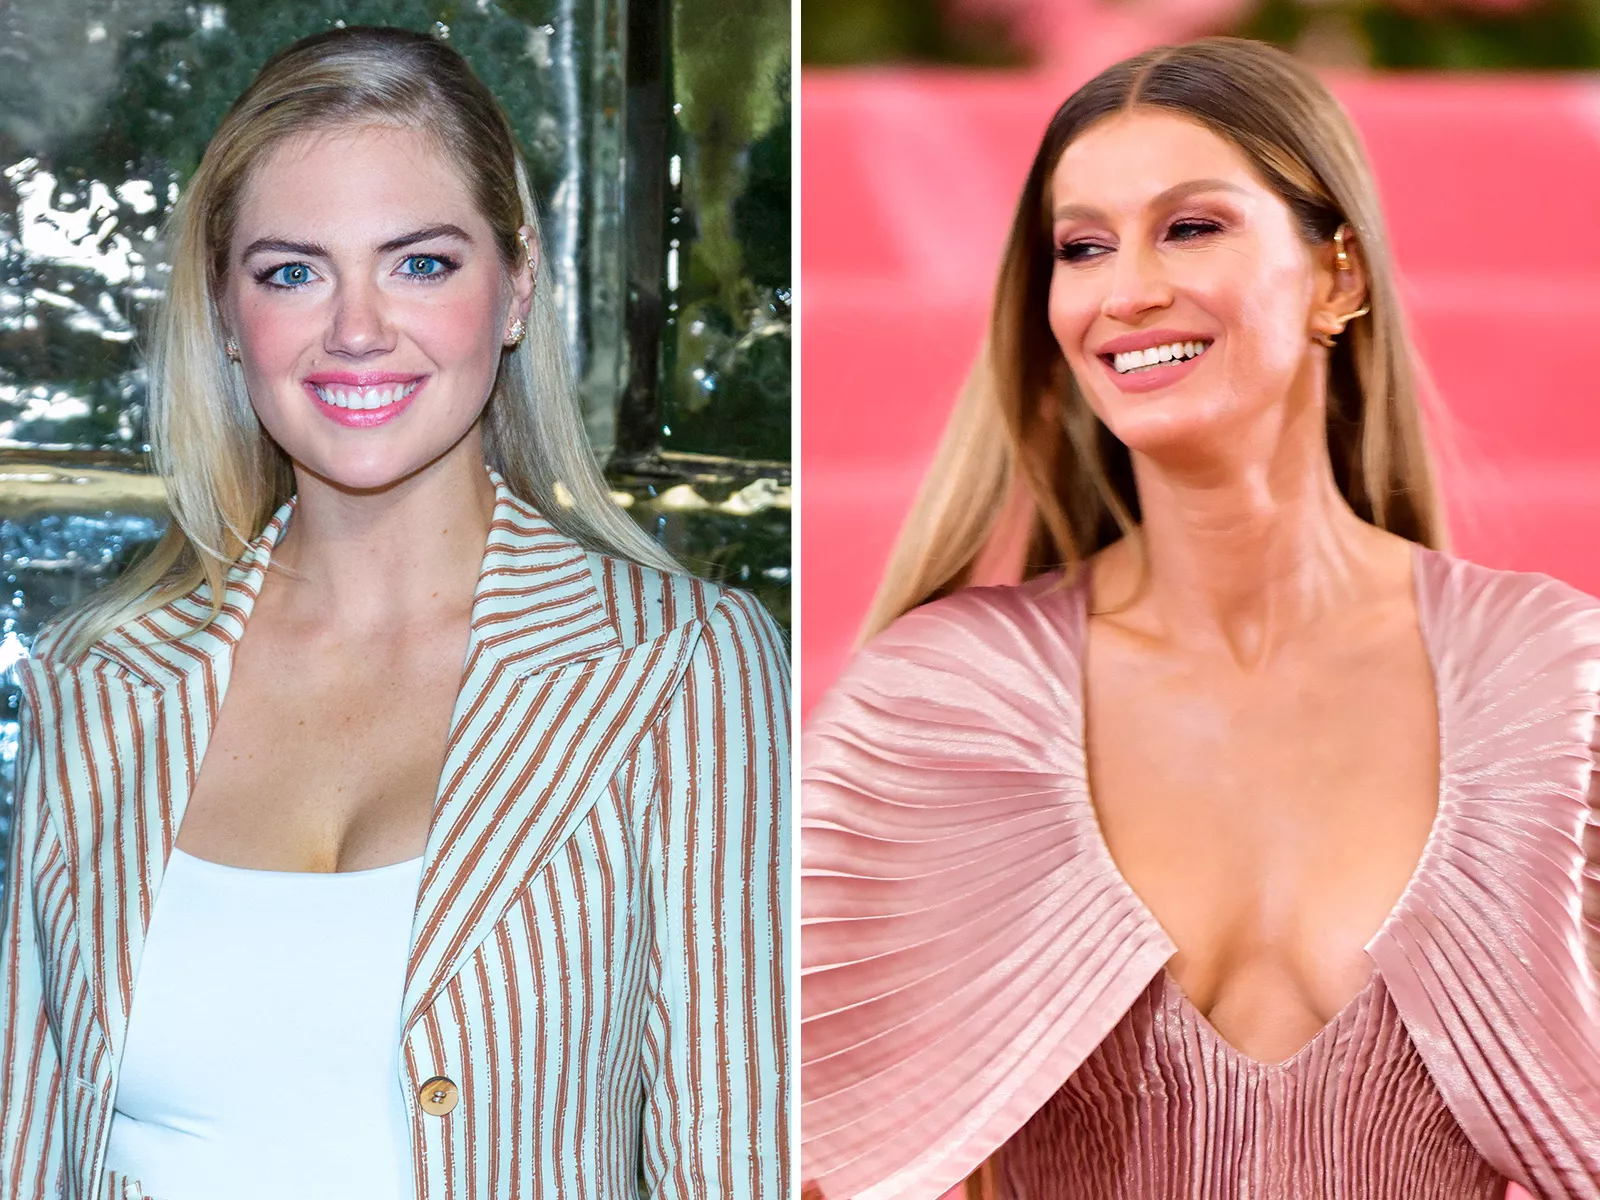 Kate Upton takes a different approach from Gisele Bünchen: She